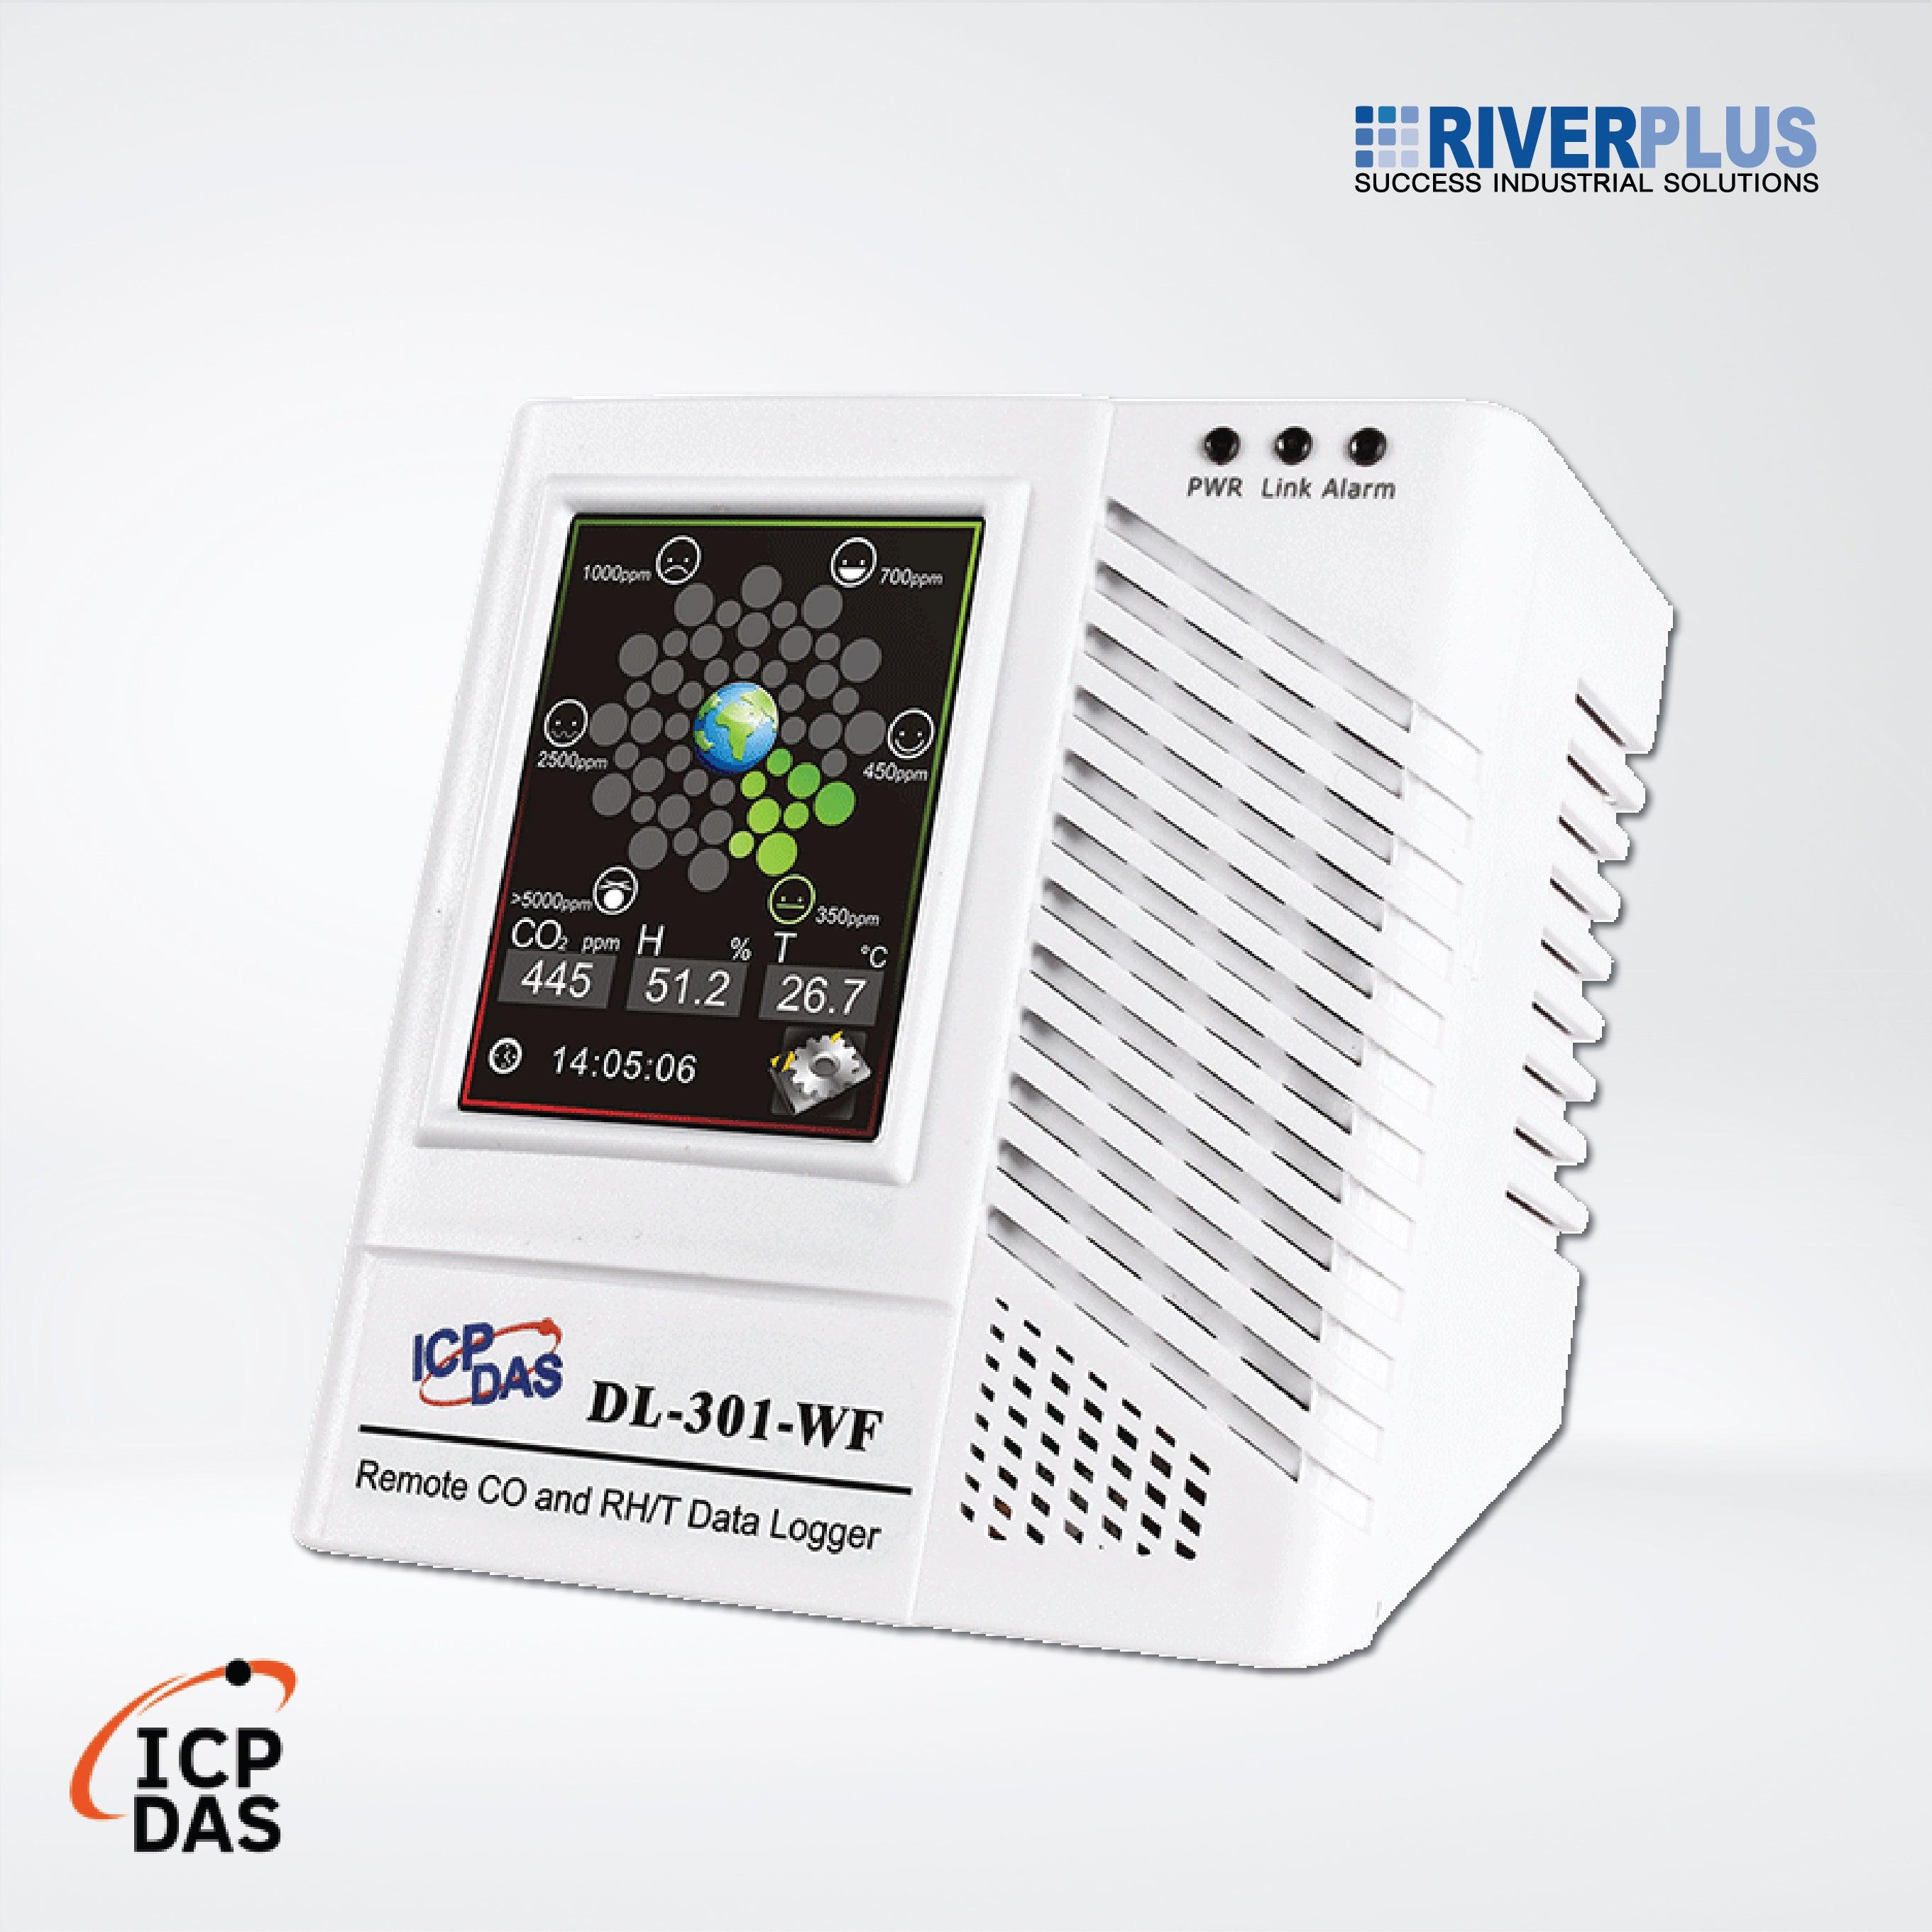 DL-301-WF Remote CO/Temperature/Humidity/Dew Point Data Logger - Riverplus